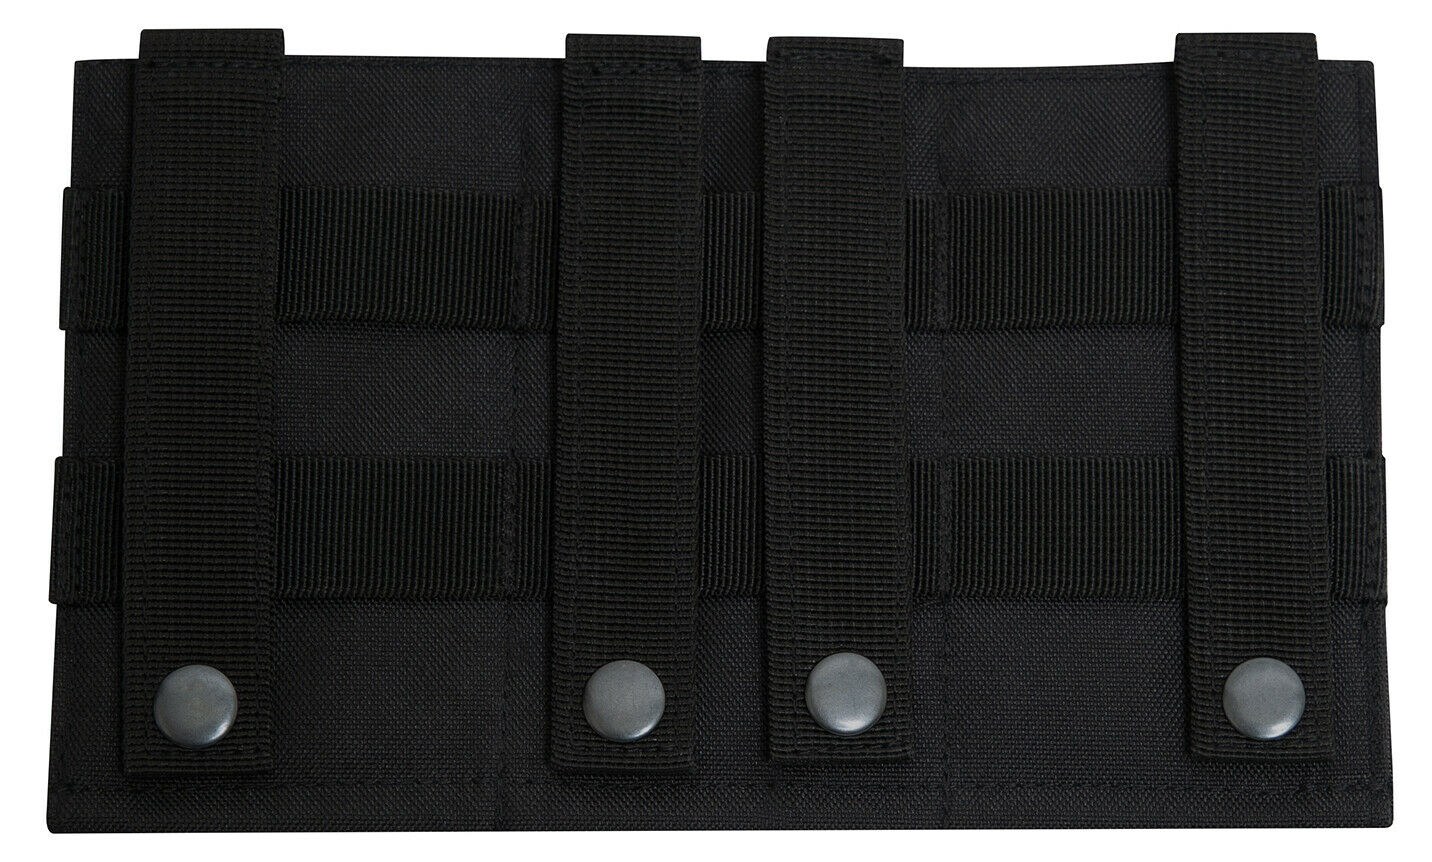 Rothco Lightweight 3 Mag Elastic Retention Pouch - Black